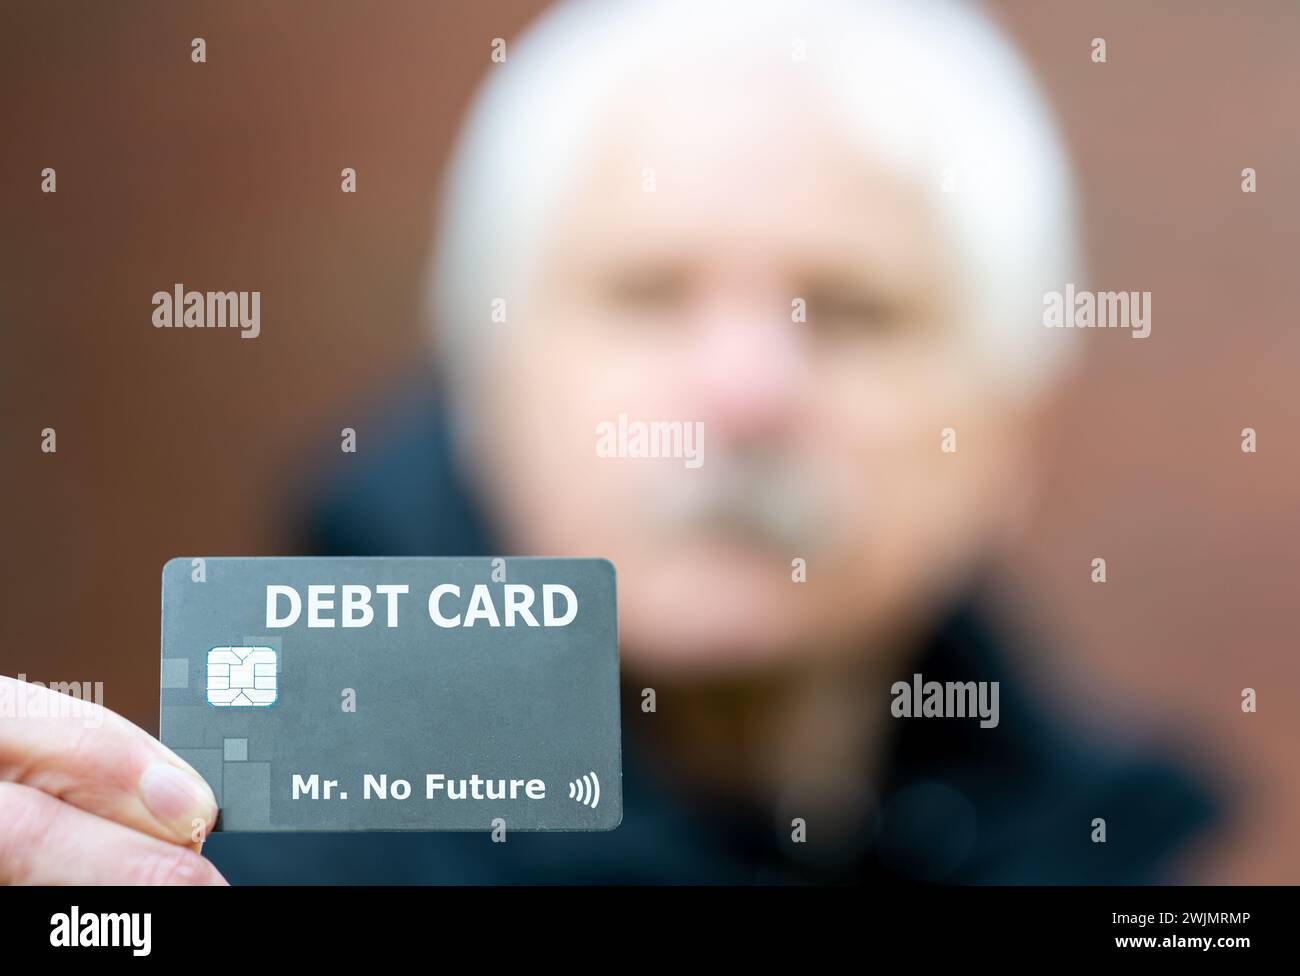 Old ma holds a debit card with the label 'debt card'. Stock Photo